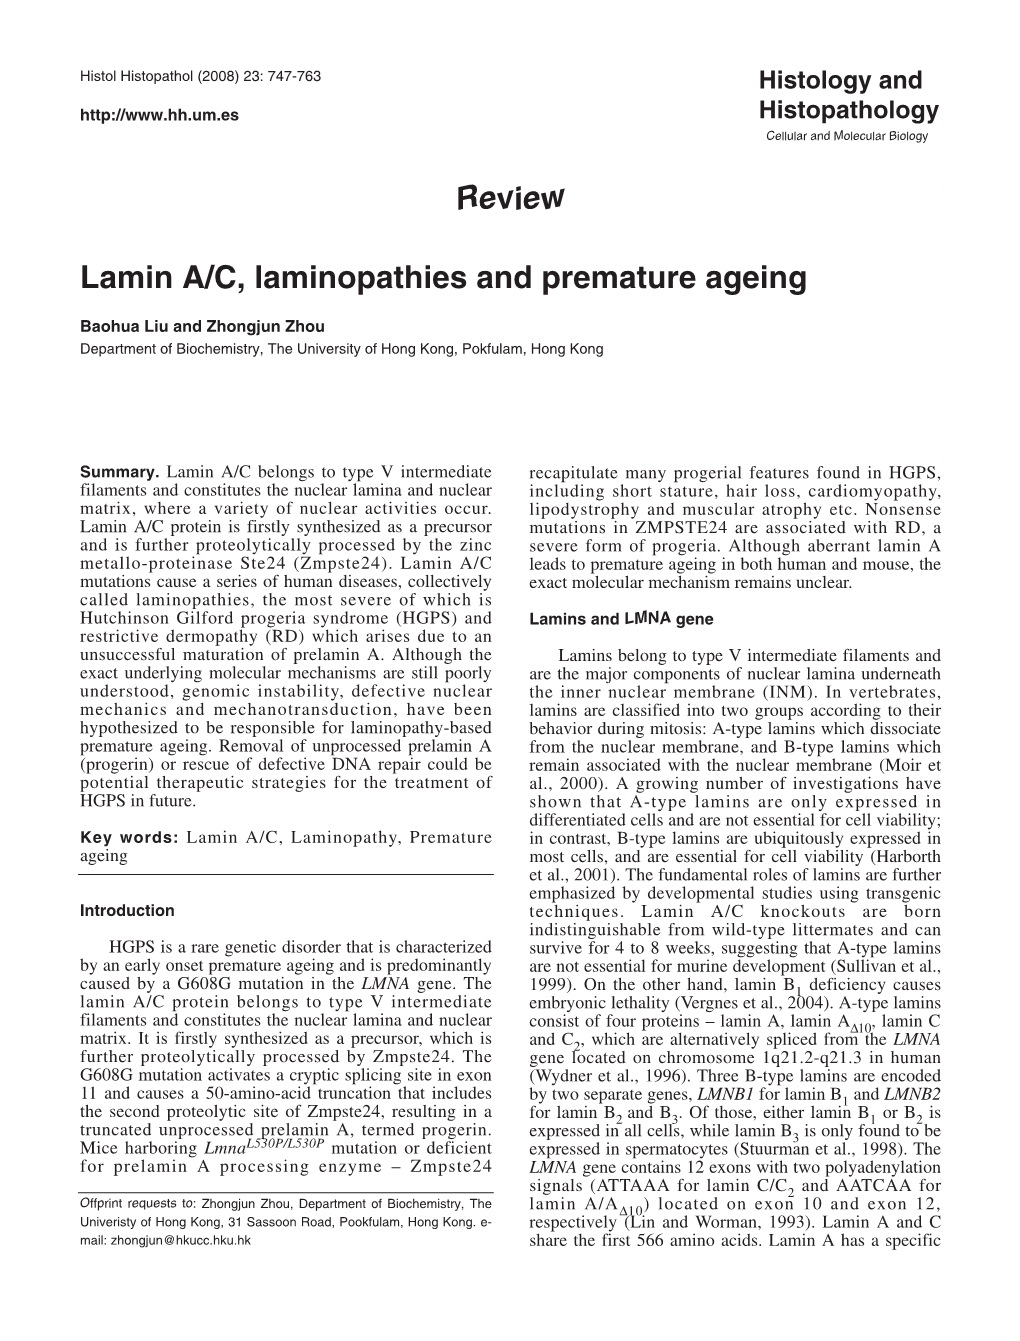 Review Lamin A/C, Laminopathies and Premature Ageing